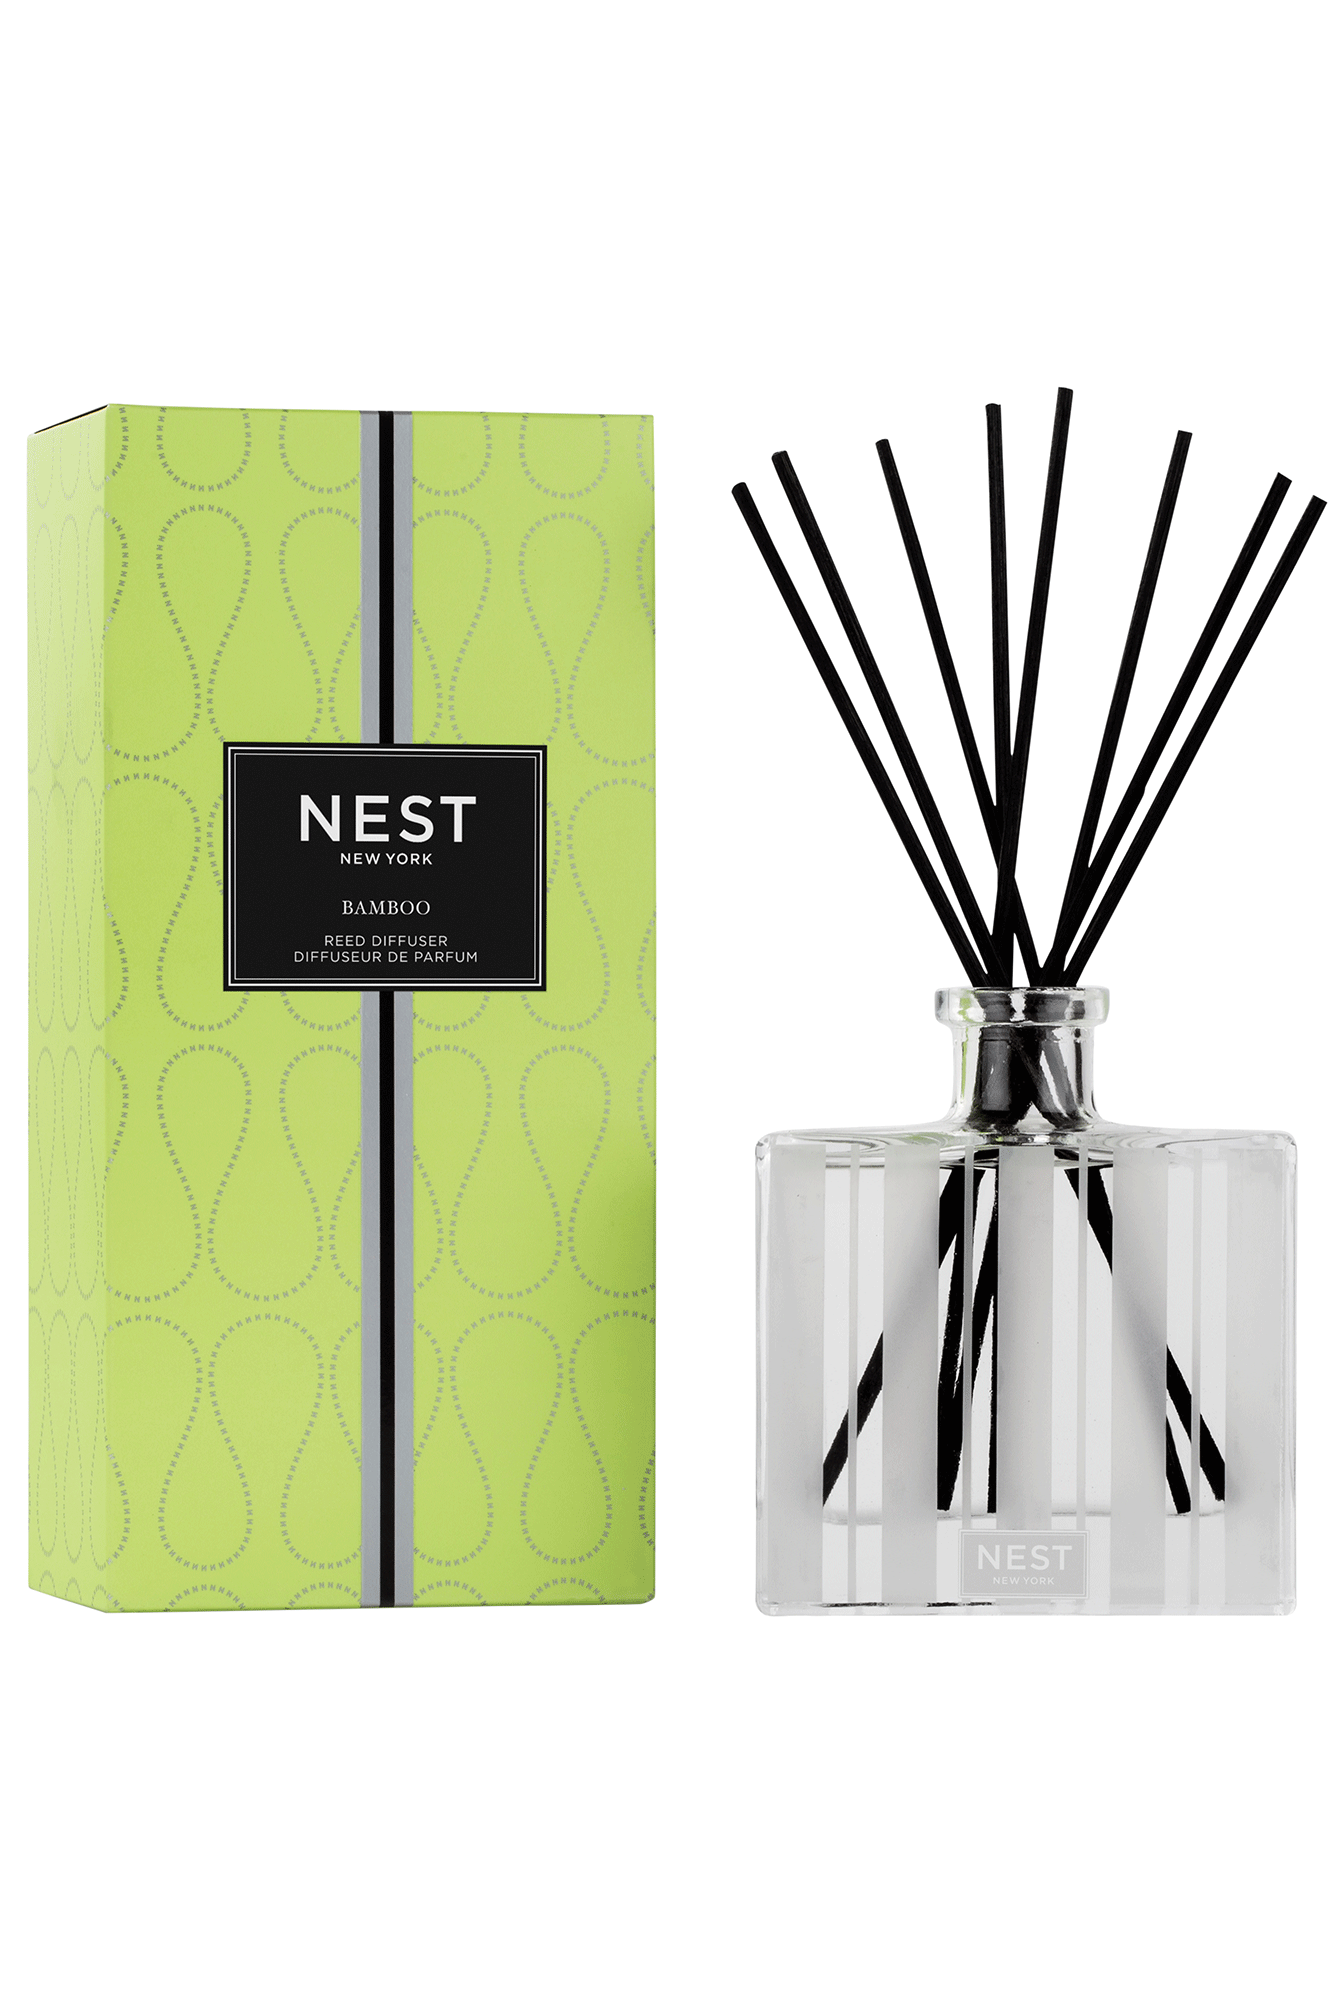 Create a luxurious atmosphere with this Bamboo Reed Diffuser from Nest. Featuring a blend of white florals with an abundance of lush green notes and hints of sparkling citrus, this bestselling fragrance provides an inviting, welcoming scent for any space. Enhance the ambiance of any room with this signature scent.